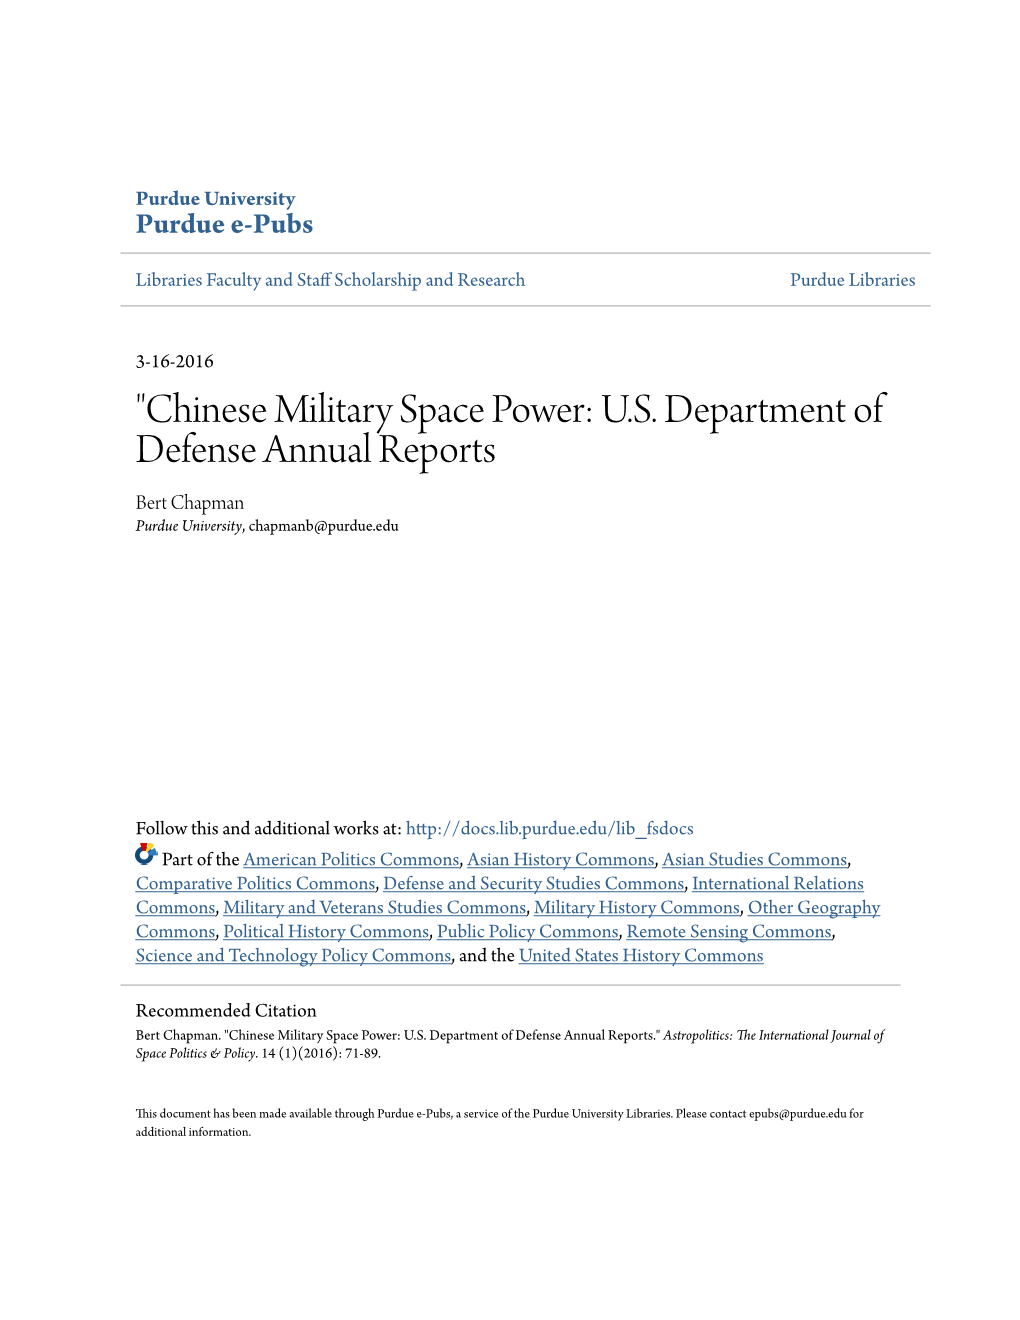 Chinese Military Space Power: US Department of Defense Annual Reports